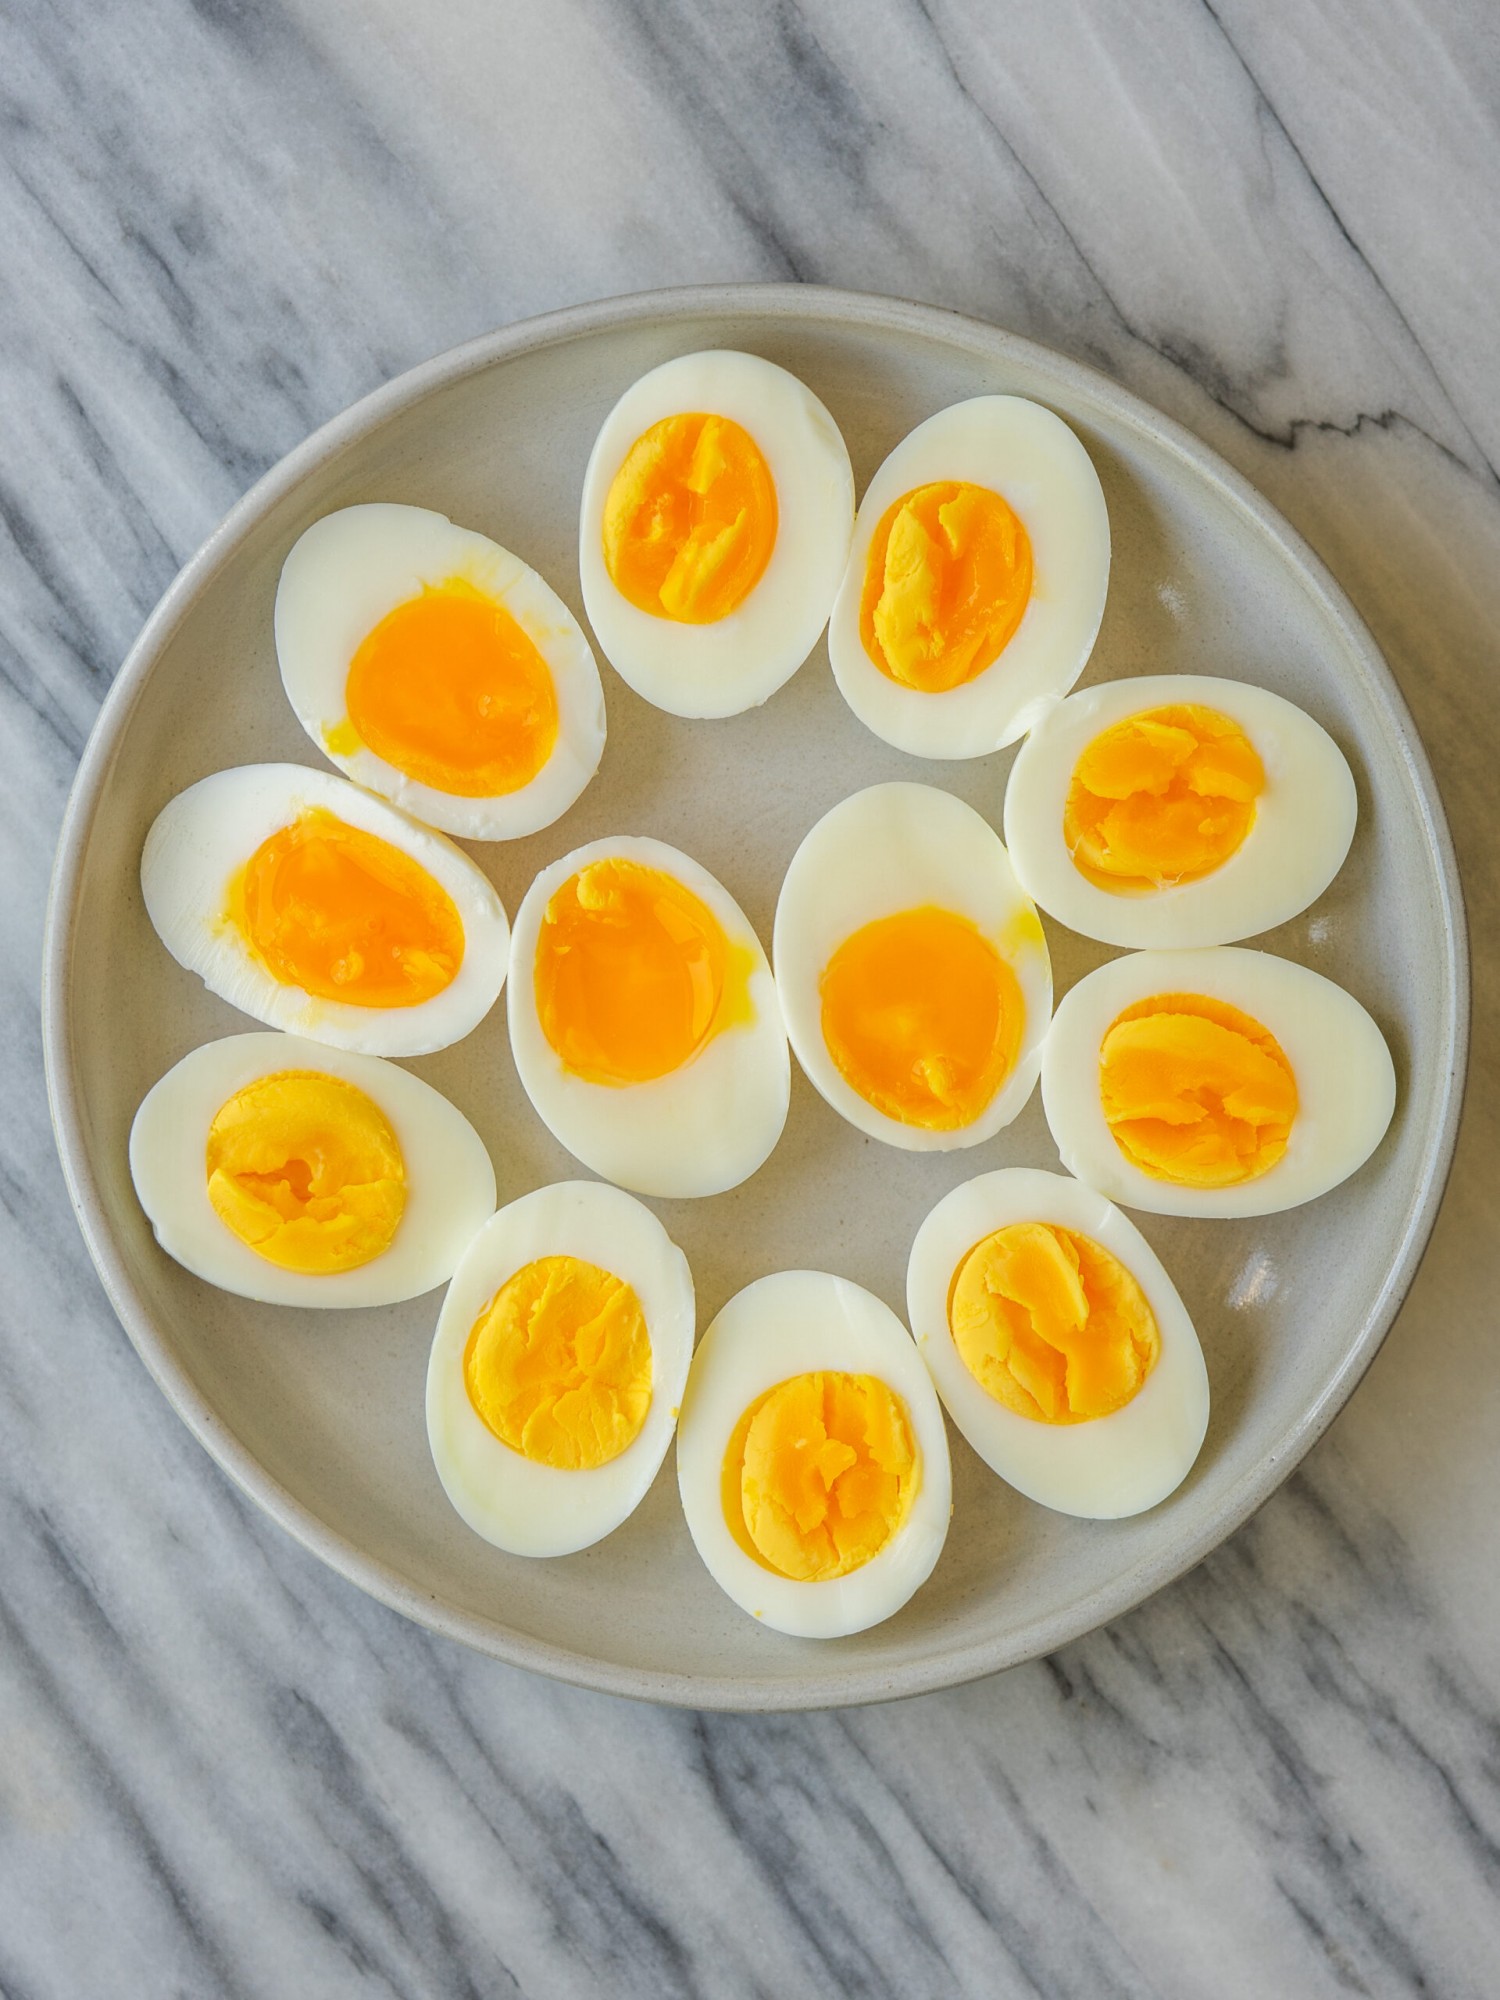 Hard boiled eggs sliced in half on a plate